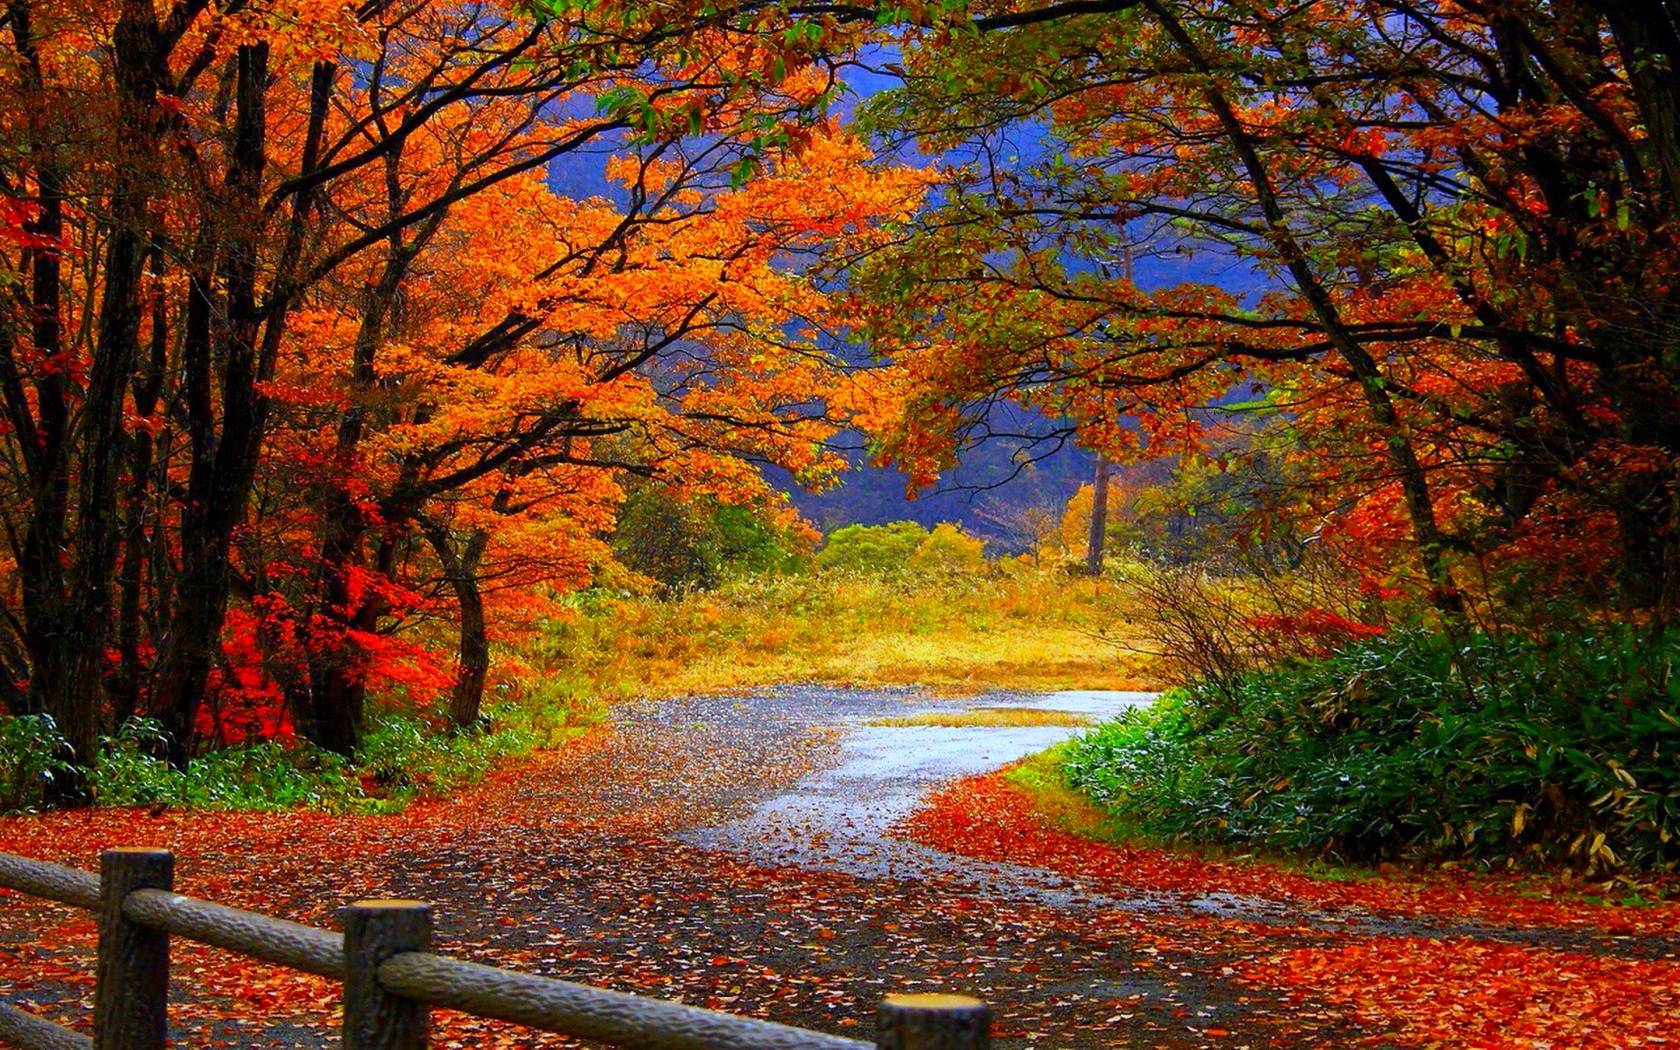 Android Autumn Live Wallpaper to Enjoy Falling Leaves